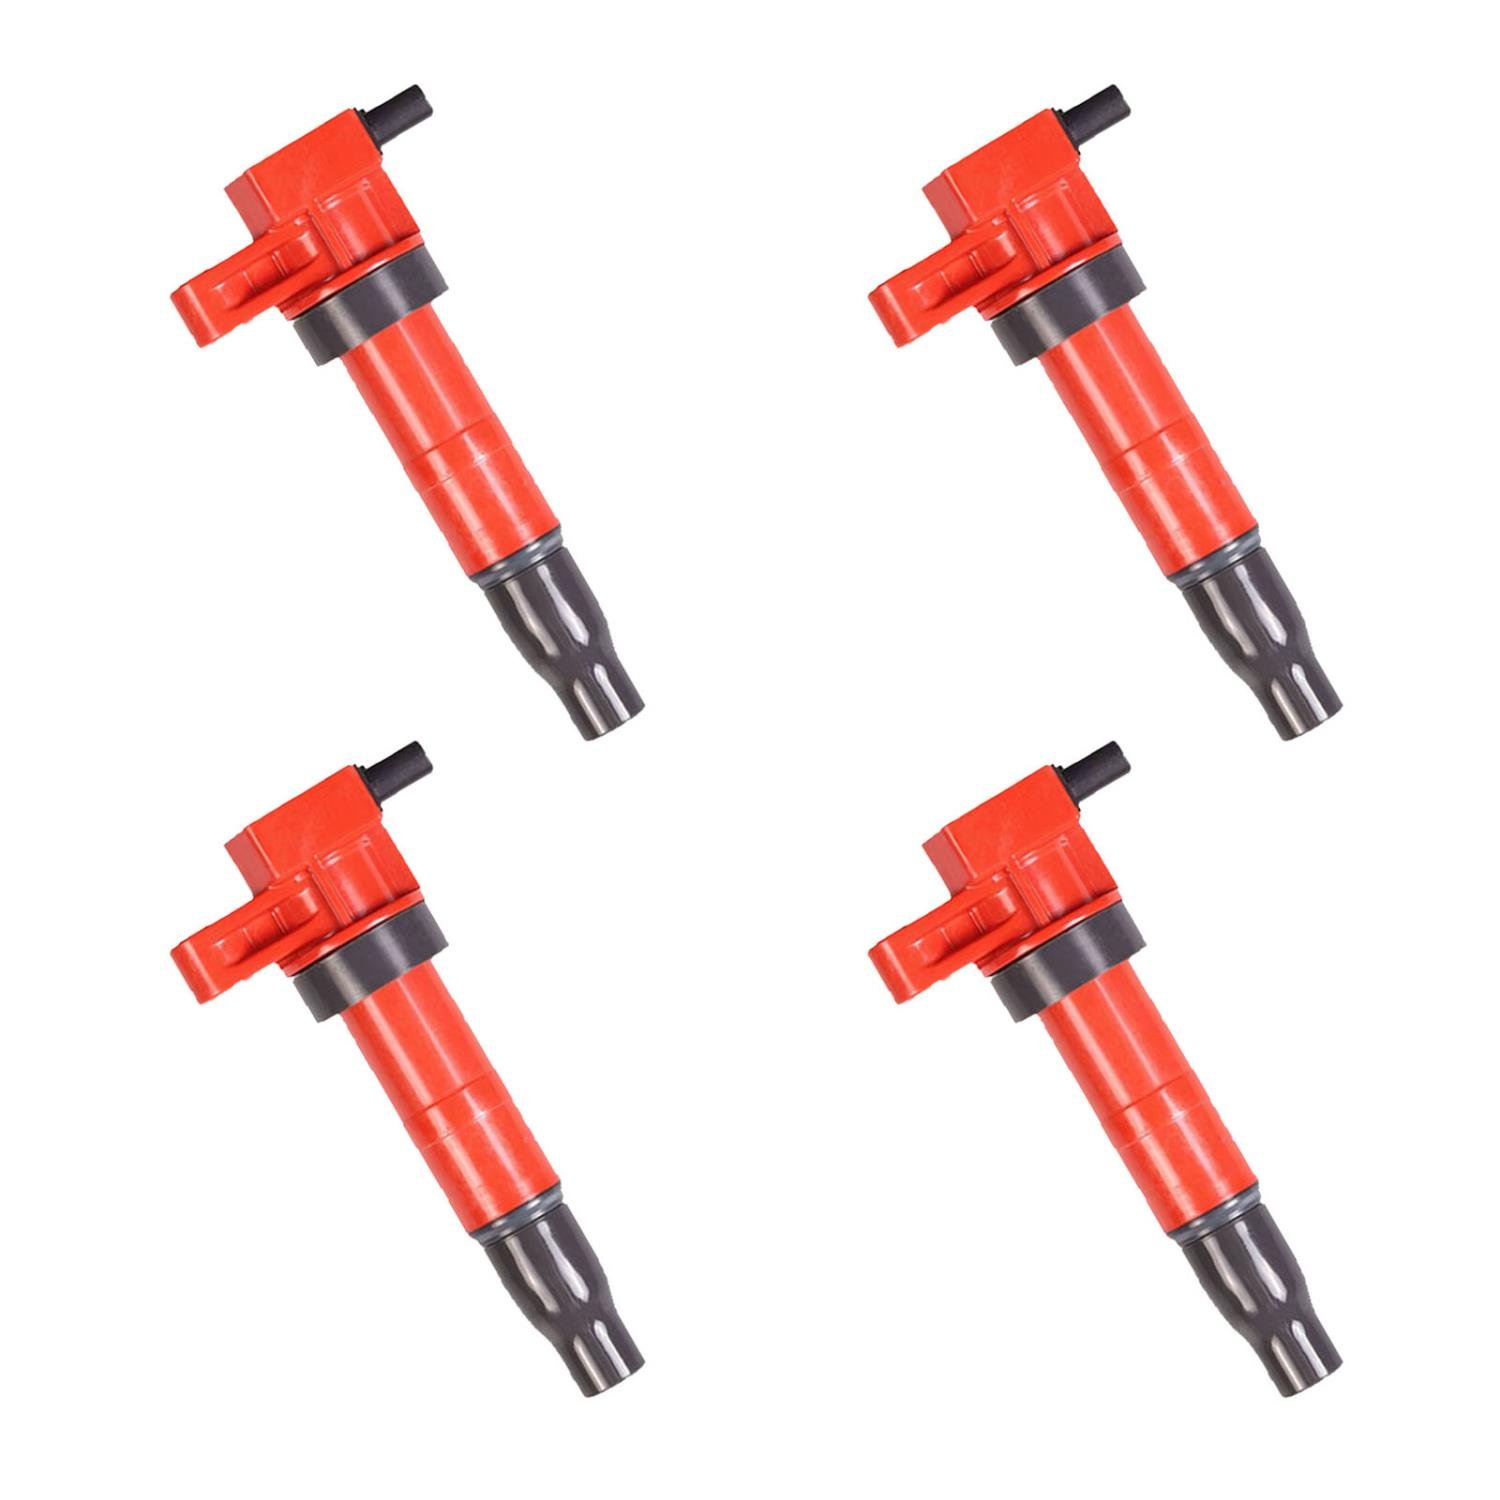 High-Performance Ignition Coils for 2006-2012 Kia Sedona 3.5L 3.8L [Red]